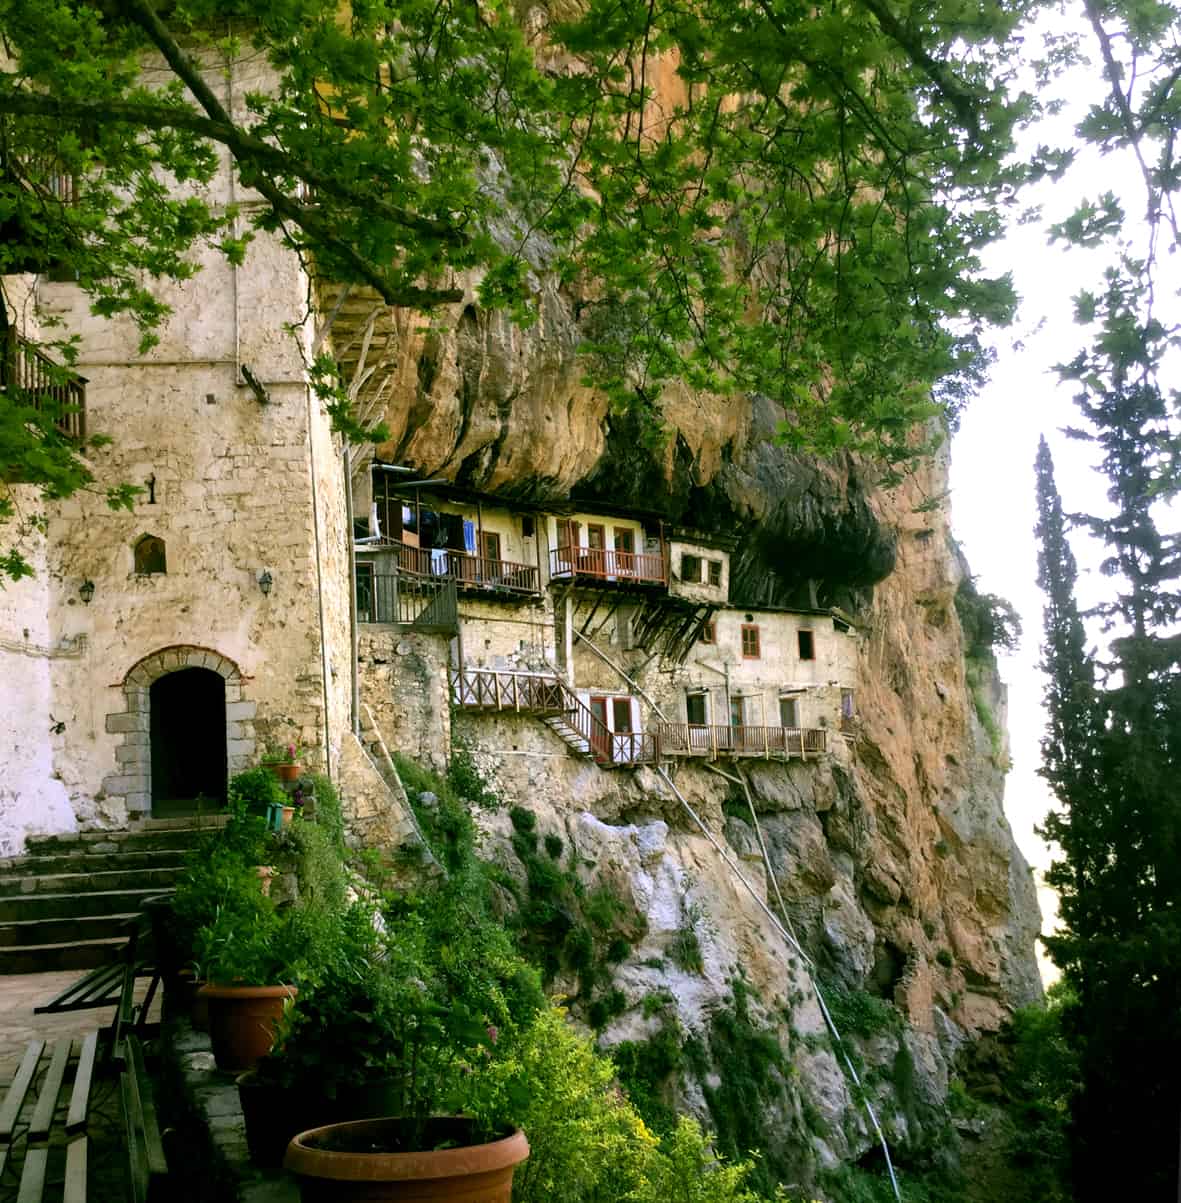 private day tours from Athens to the entrance to the monastery in a cliff with the building on the cliff edge